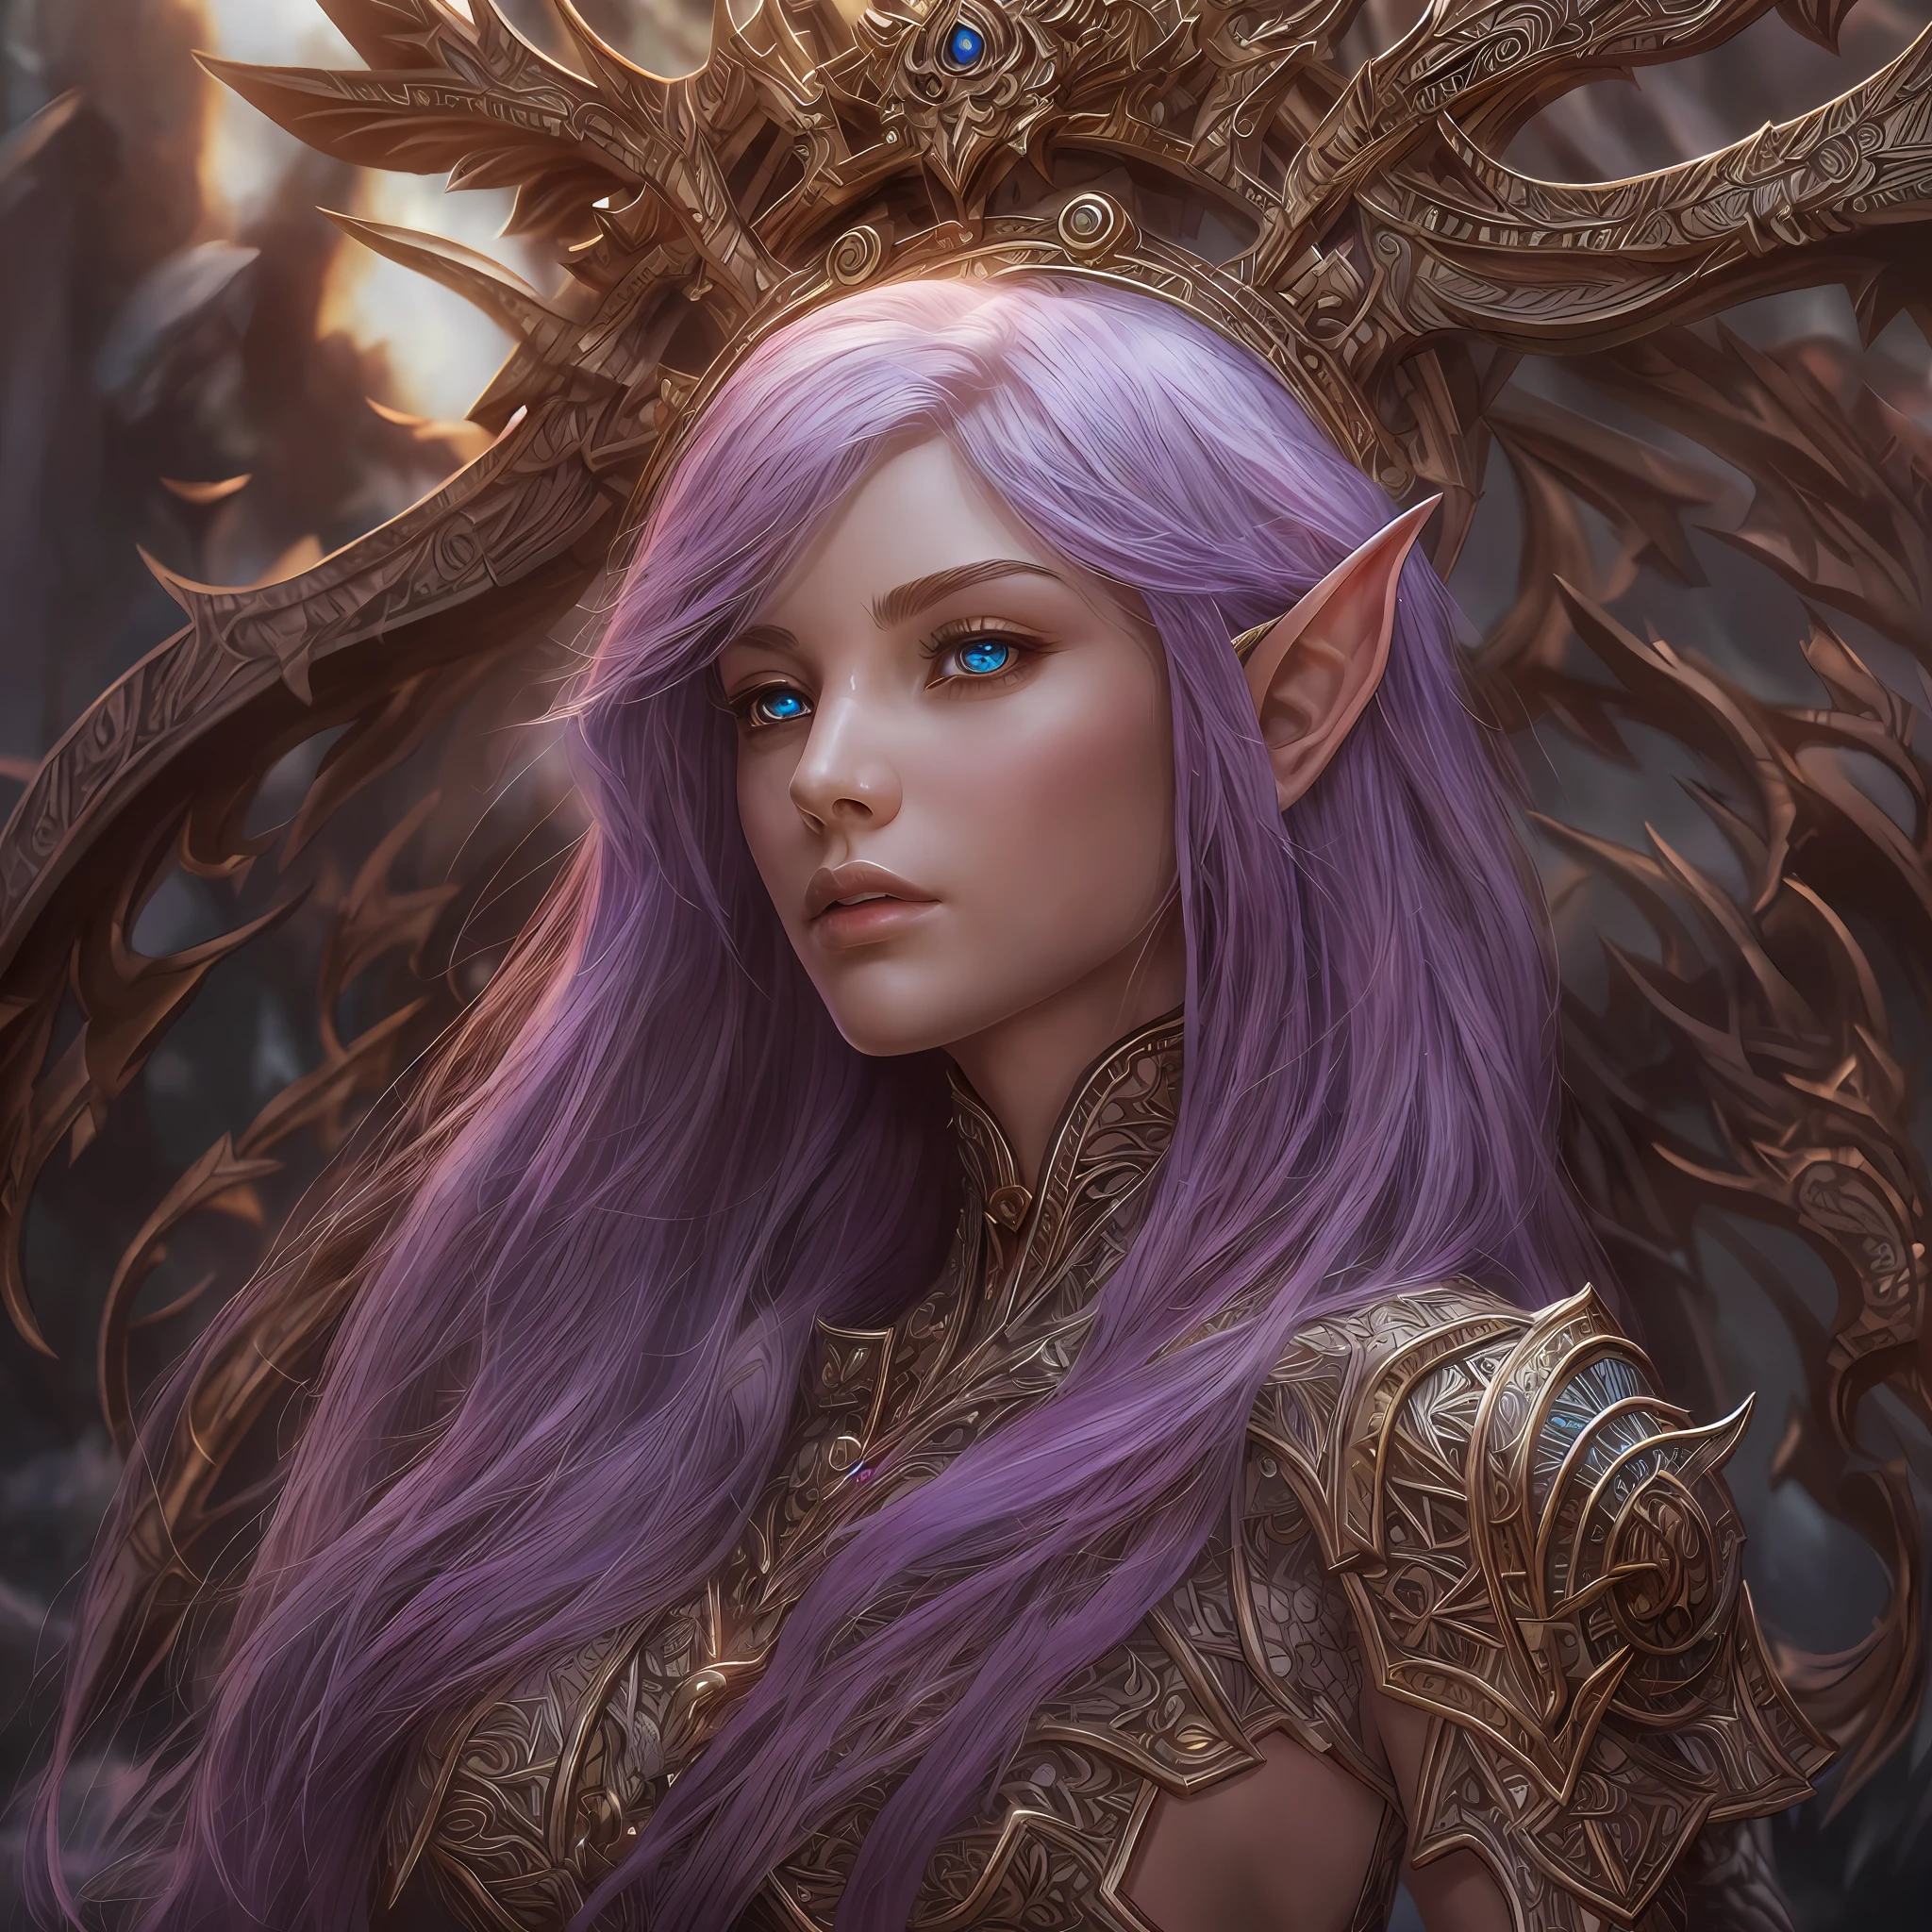 high details, best quality, 8k, [ultra detailed], masterpiece, best quality, (extremely detailed), dynamic angle, ultra wide shot, RAW, photorealistic, fantasy art, dnd art, rpg art, realistic art, a wide angle picture of an epic female elf, arcane warrior, warrior of magic, fighter of the arcana, full body, [[anatomically correct]] full body (1.5 intricate details, Masterpiece, best quality) casting a spell (1.5 intricate details, Masterpiece, best quality), casting an epic spell, [colorful magical sigils in the air],[ colorful arcane markings floating] (1.6 intricate details, Masterpiece, best quality) holding an [epic magical sword] (1.5 intricate details, Masterpiece, best quality) holding epic [magical sword glowing in red light] (1.5 intricate details, Masterpiece, best quality). in fantasy urban street (1.5 intricate details, Masterpiece, best quality), a female beautiful epic elf wearing elven leather armor (1.4 intricate details, Masterpiece, best quality), high heeled leather boots, ultra detailed face,  thick hair, long hair, dynamic hair, fair skin intense eyes, fantasy city background (intense details), sun light, backlight, depth of field (1.4 intricate details, Masterpiece, best quality), dynamic angle, (1.4 intricate details, Masterpiece, best quality) 3D rendering, high details, best quality, highres, ultra wide angle